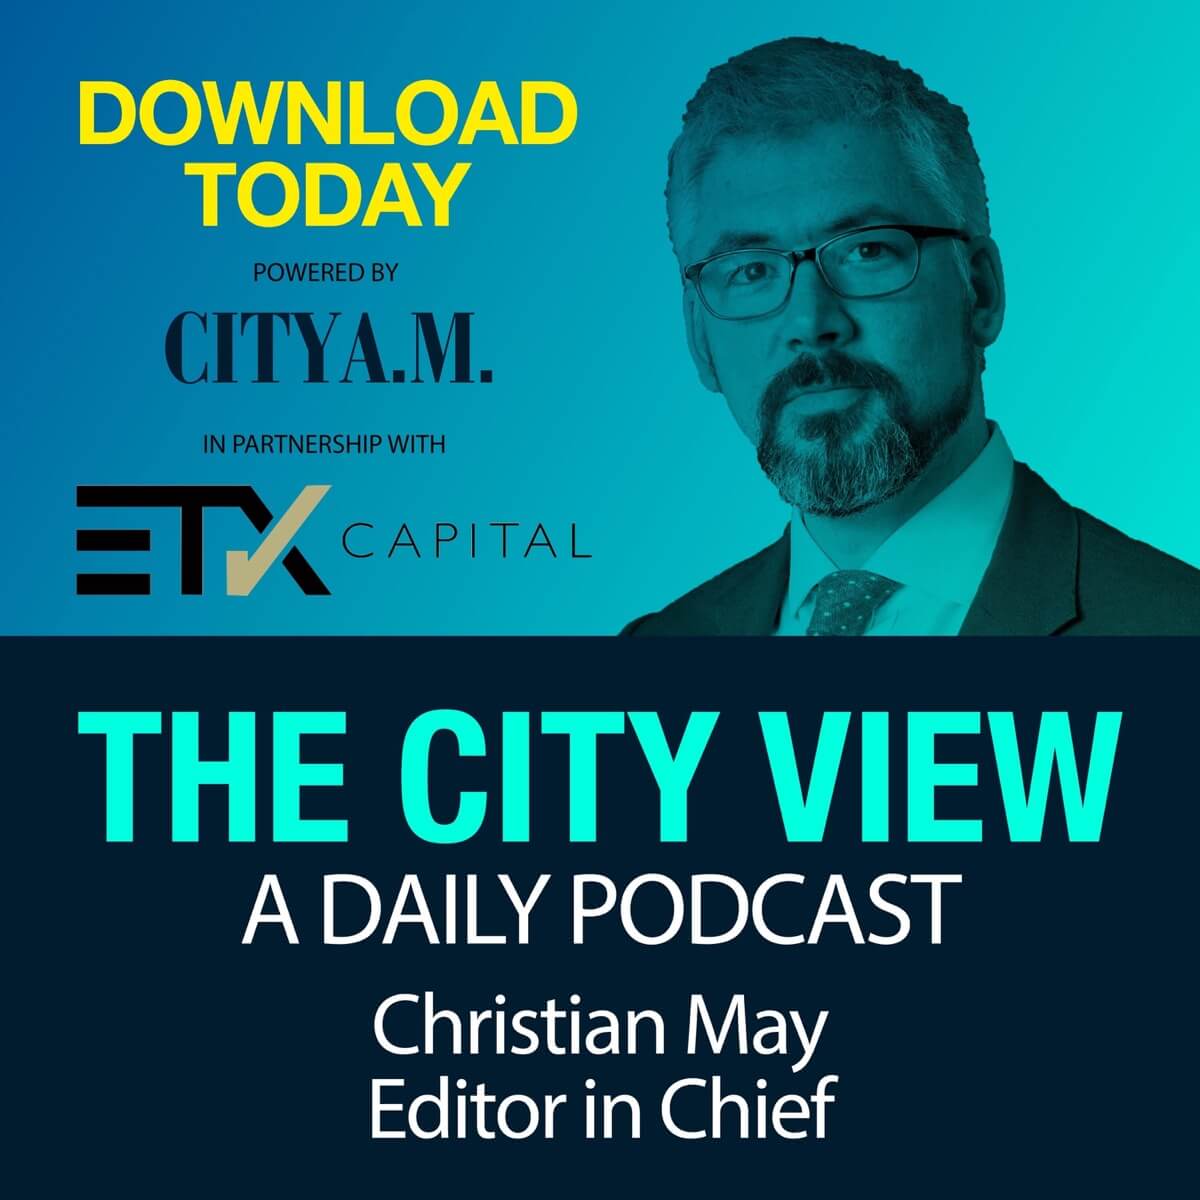 Edwin Brenninkmeyer featured on The City View podcast